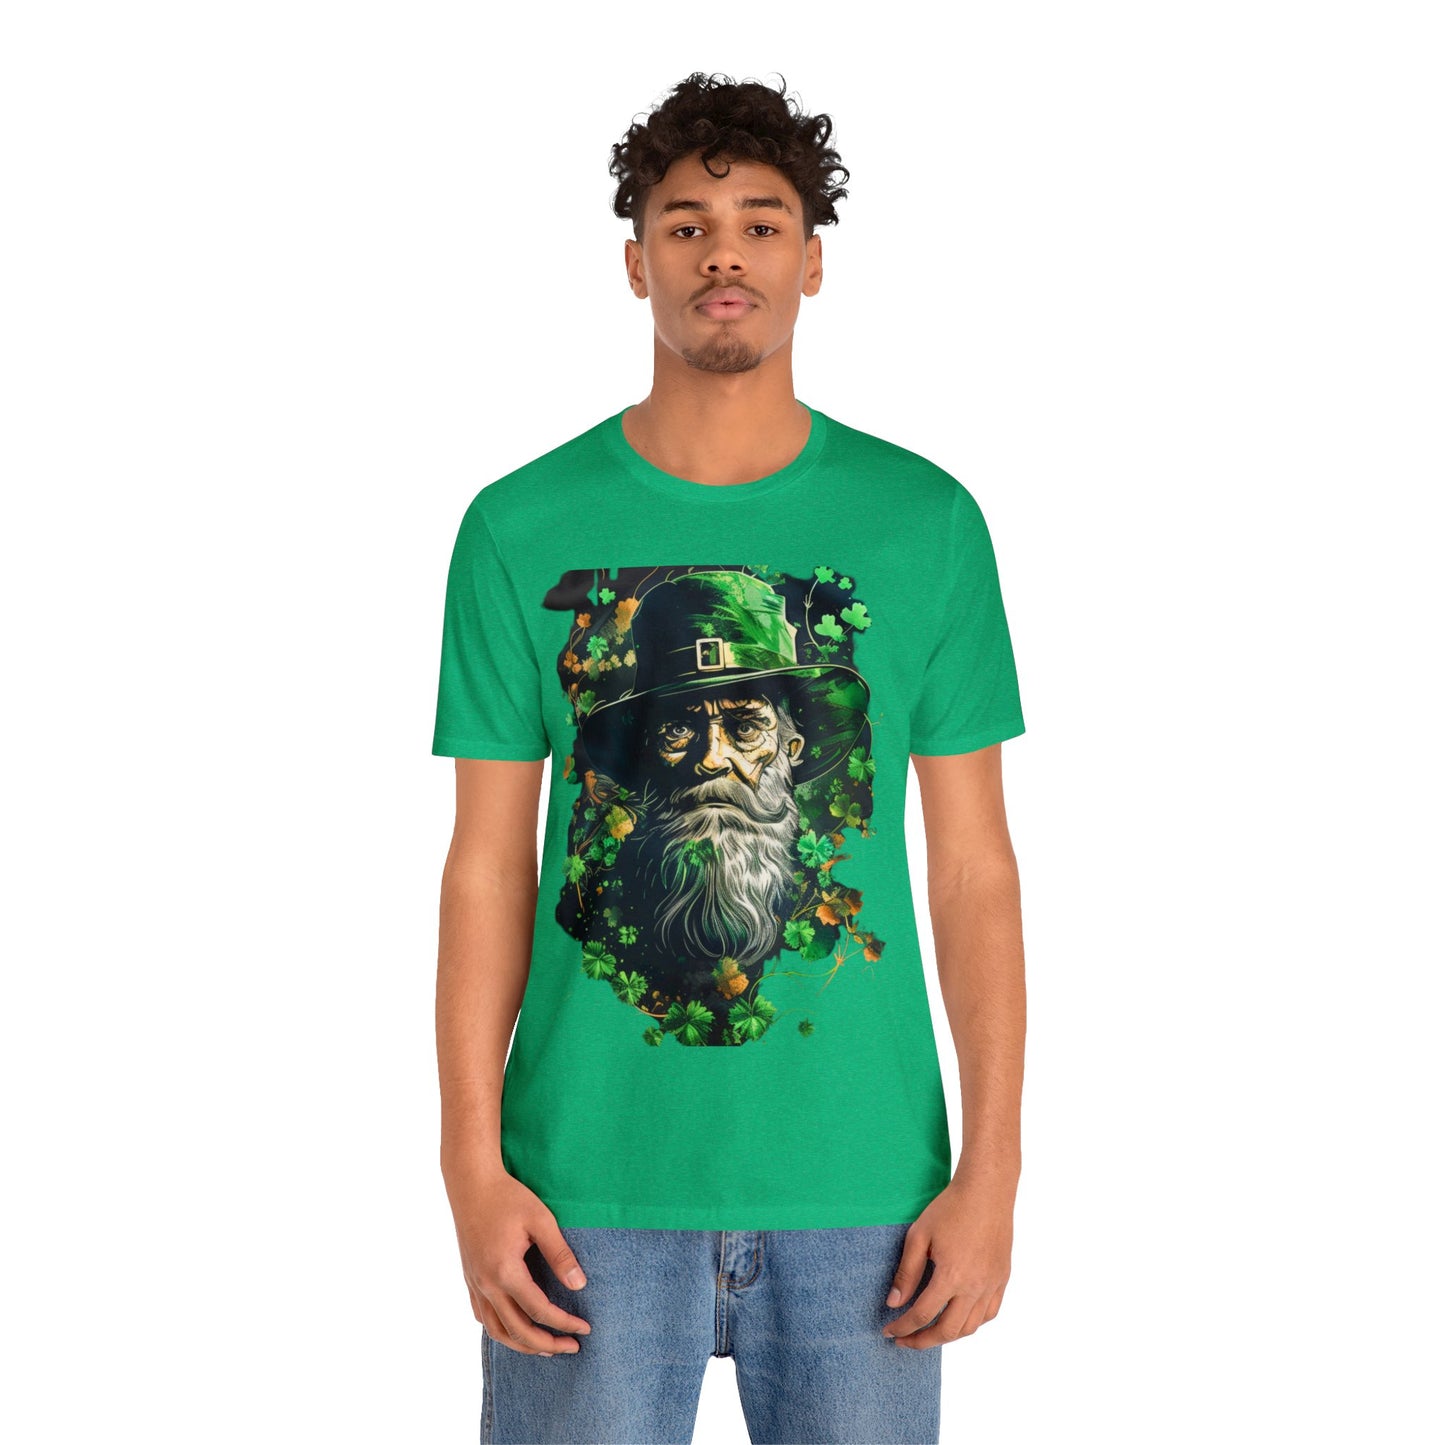 St Paddy Shirt St Patrick's Day Party Shirt Clover Shirt